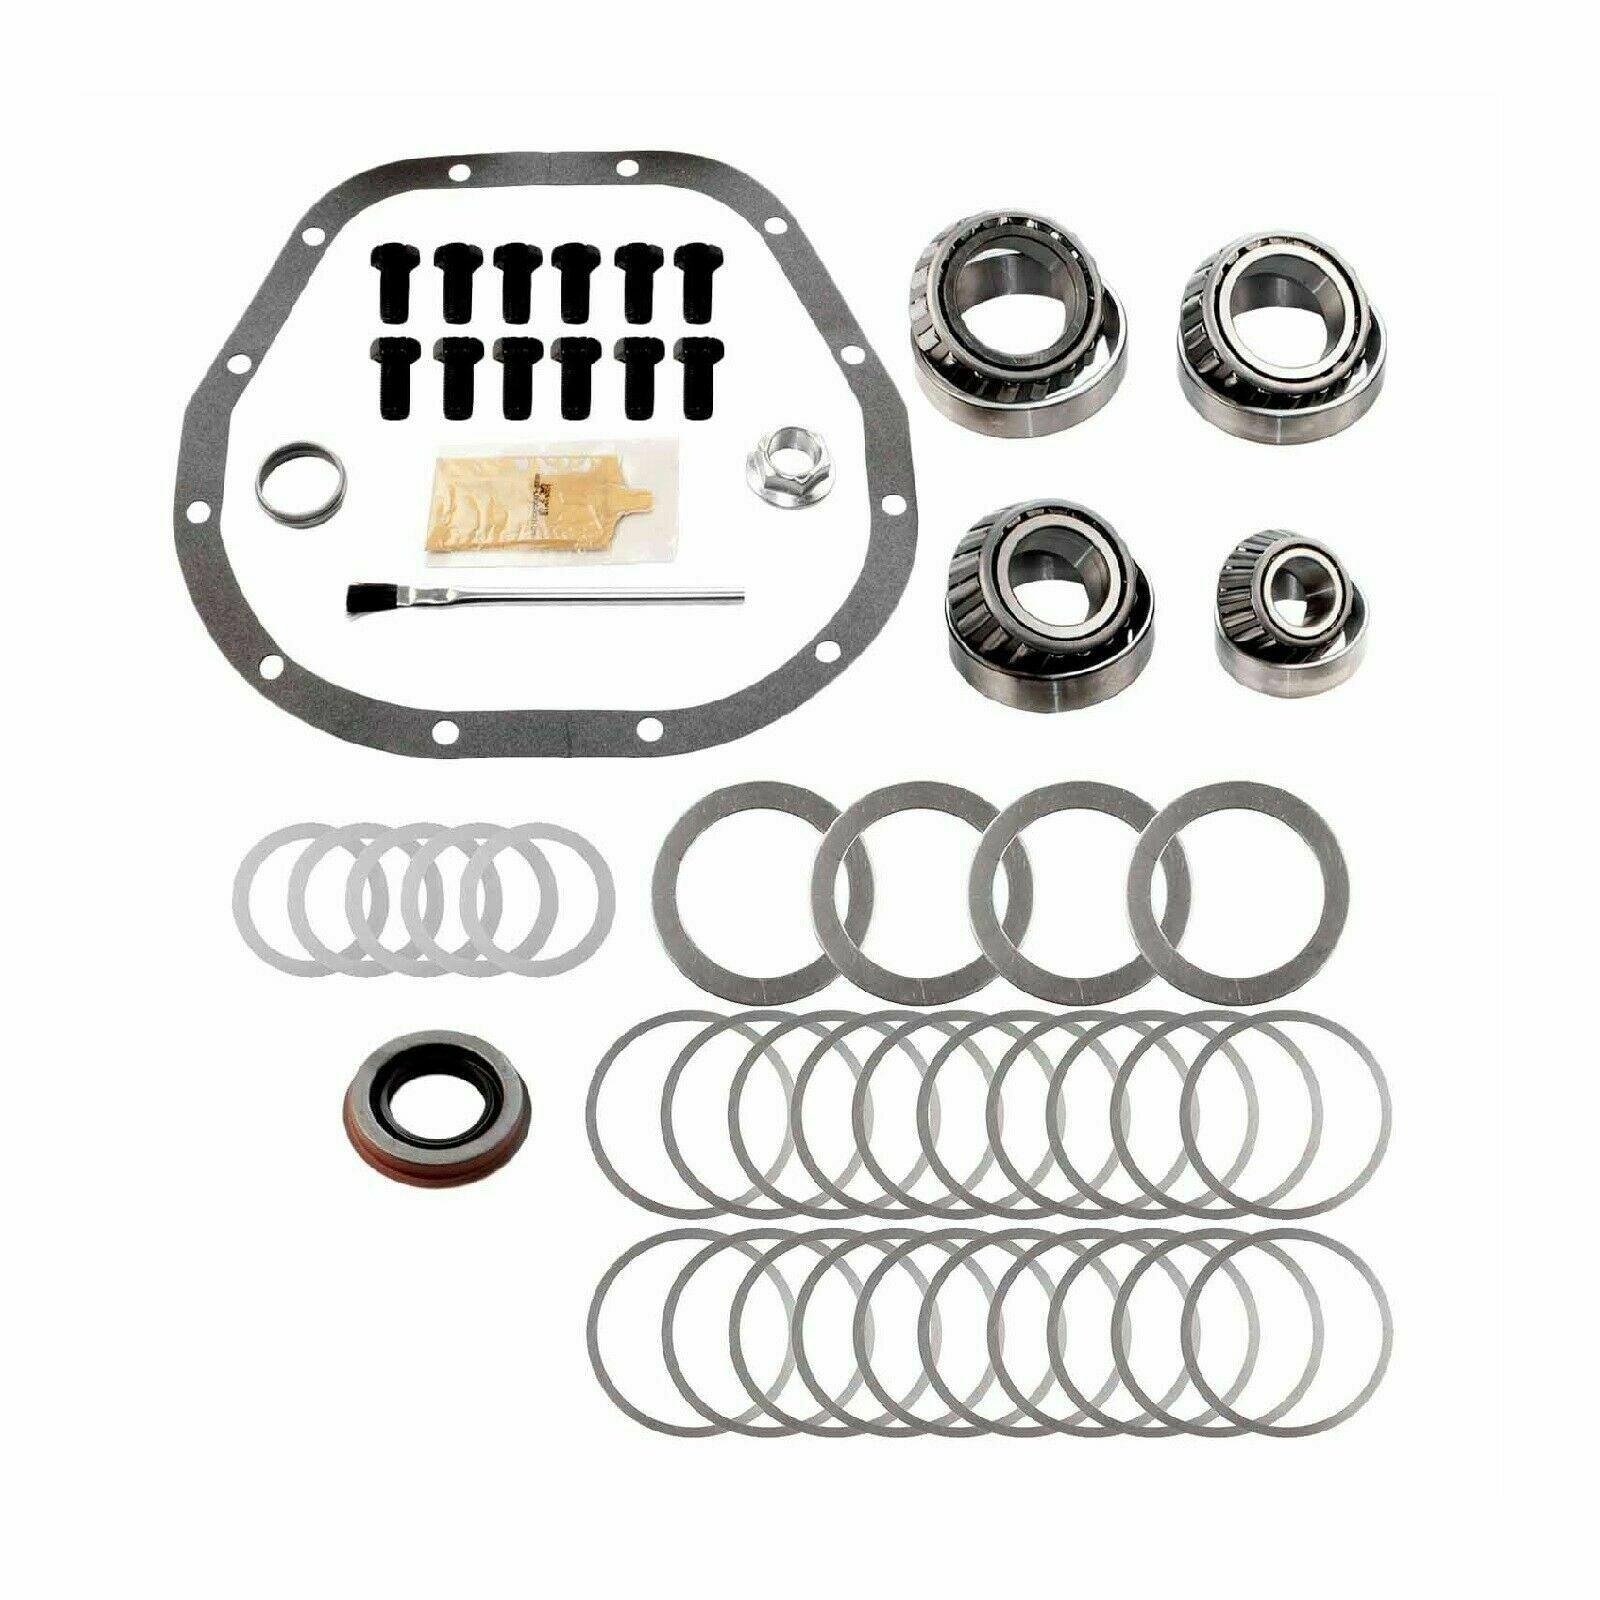 R10.25Rmk Motive Gear® Ring & Pinion Beaaring Kit For Ford F-250 F-2350 - ADVANCED TRUCK PARTS